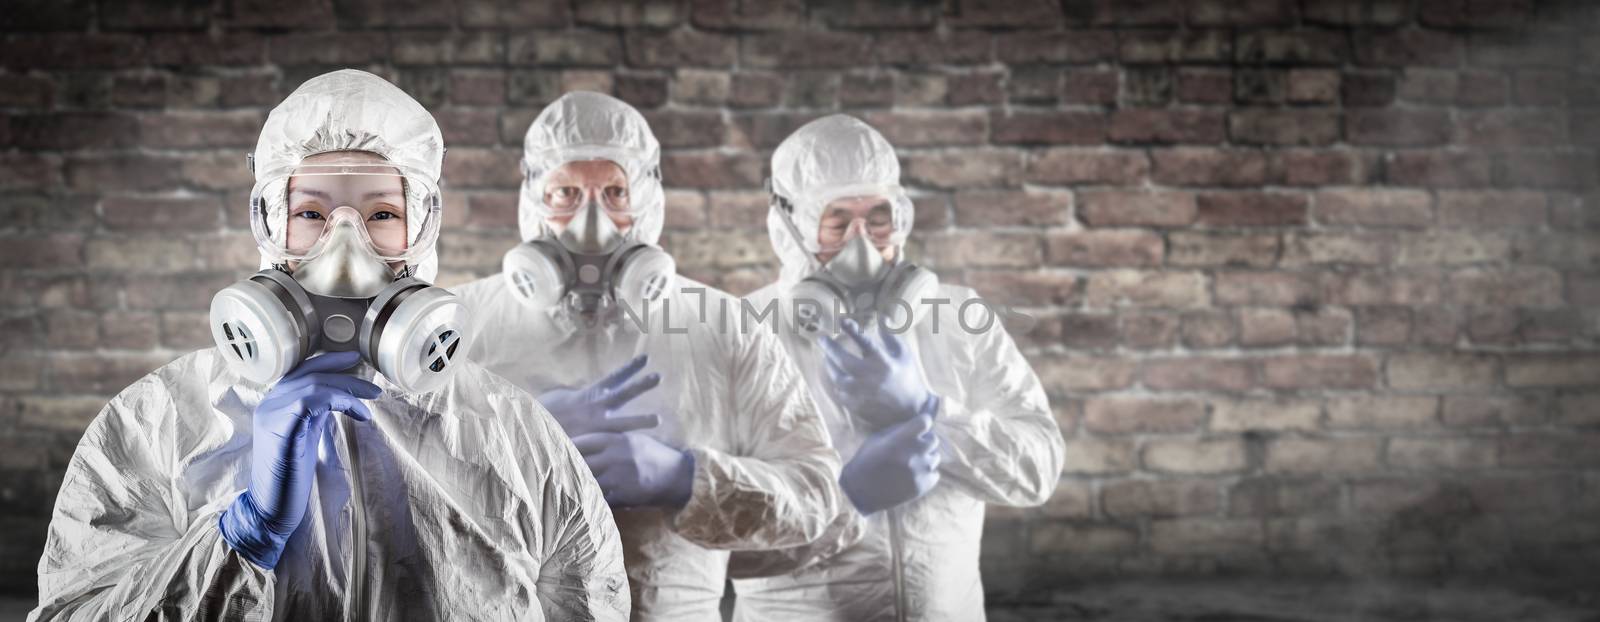 Chinese Woman and Team Behind In Hazmat Suites, Gas Masks and Goggles Against Brick Wall. by Feverpitched